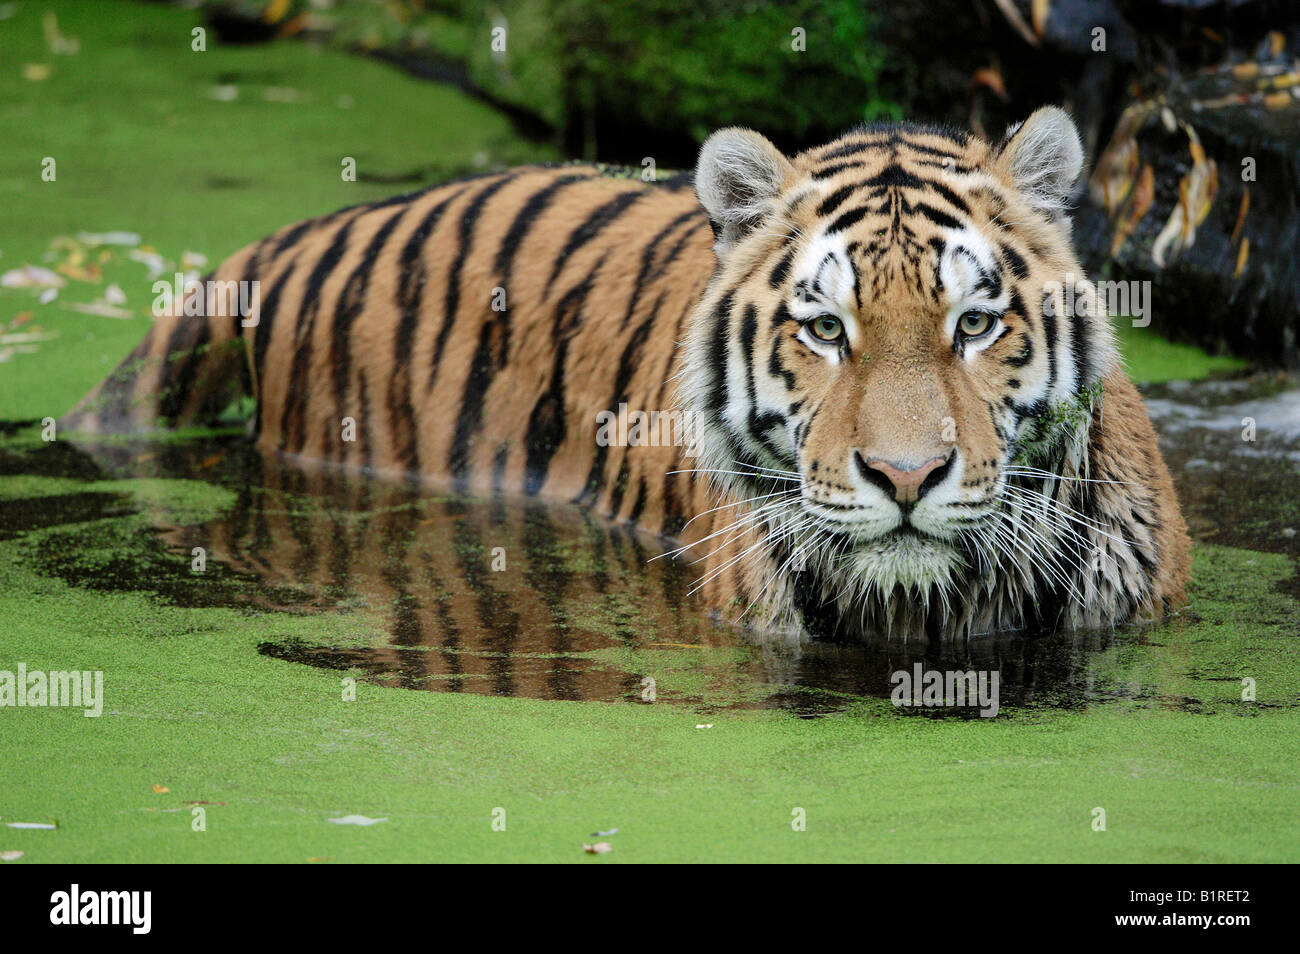 Siberian Tiger (Panthera tigris altaica) standing in algae-covered water Stock Photo